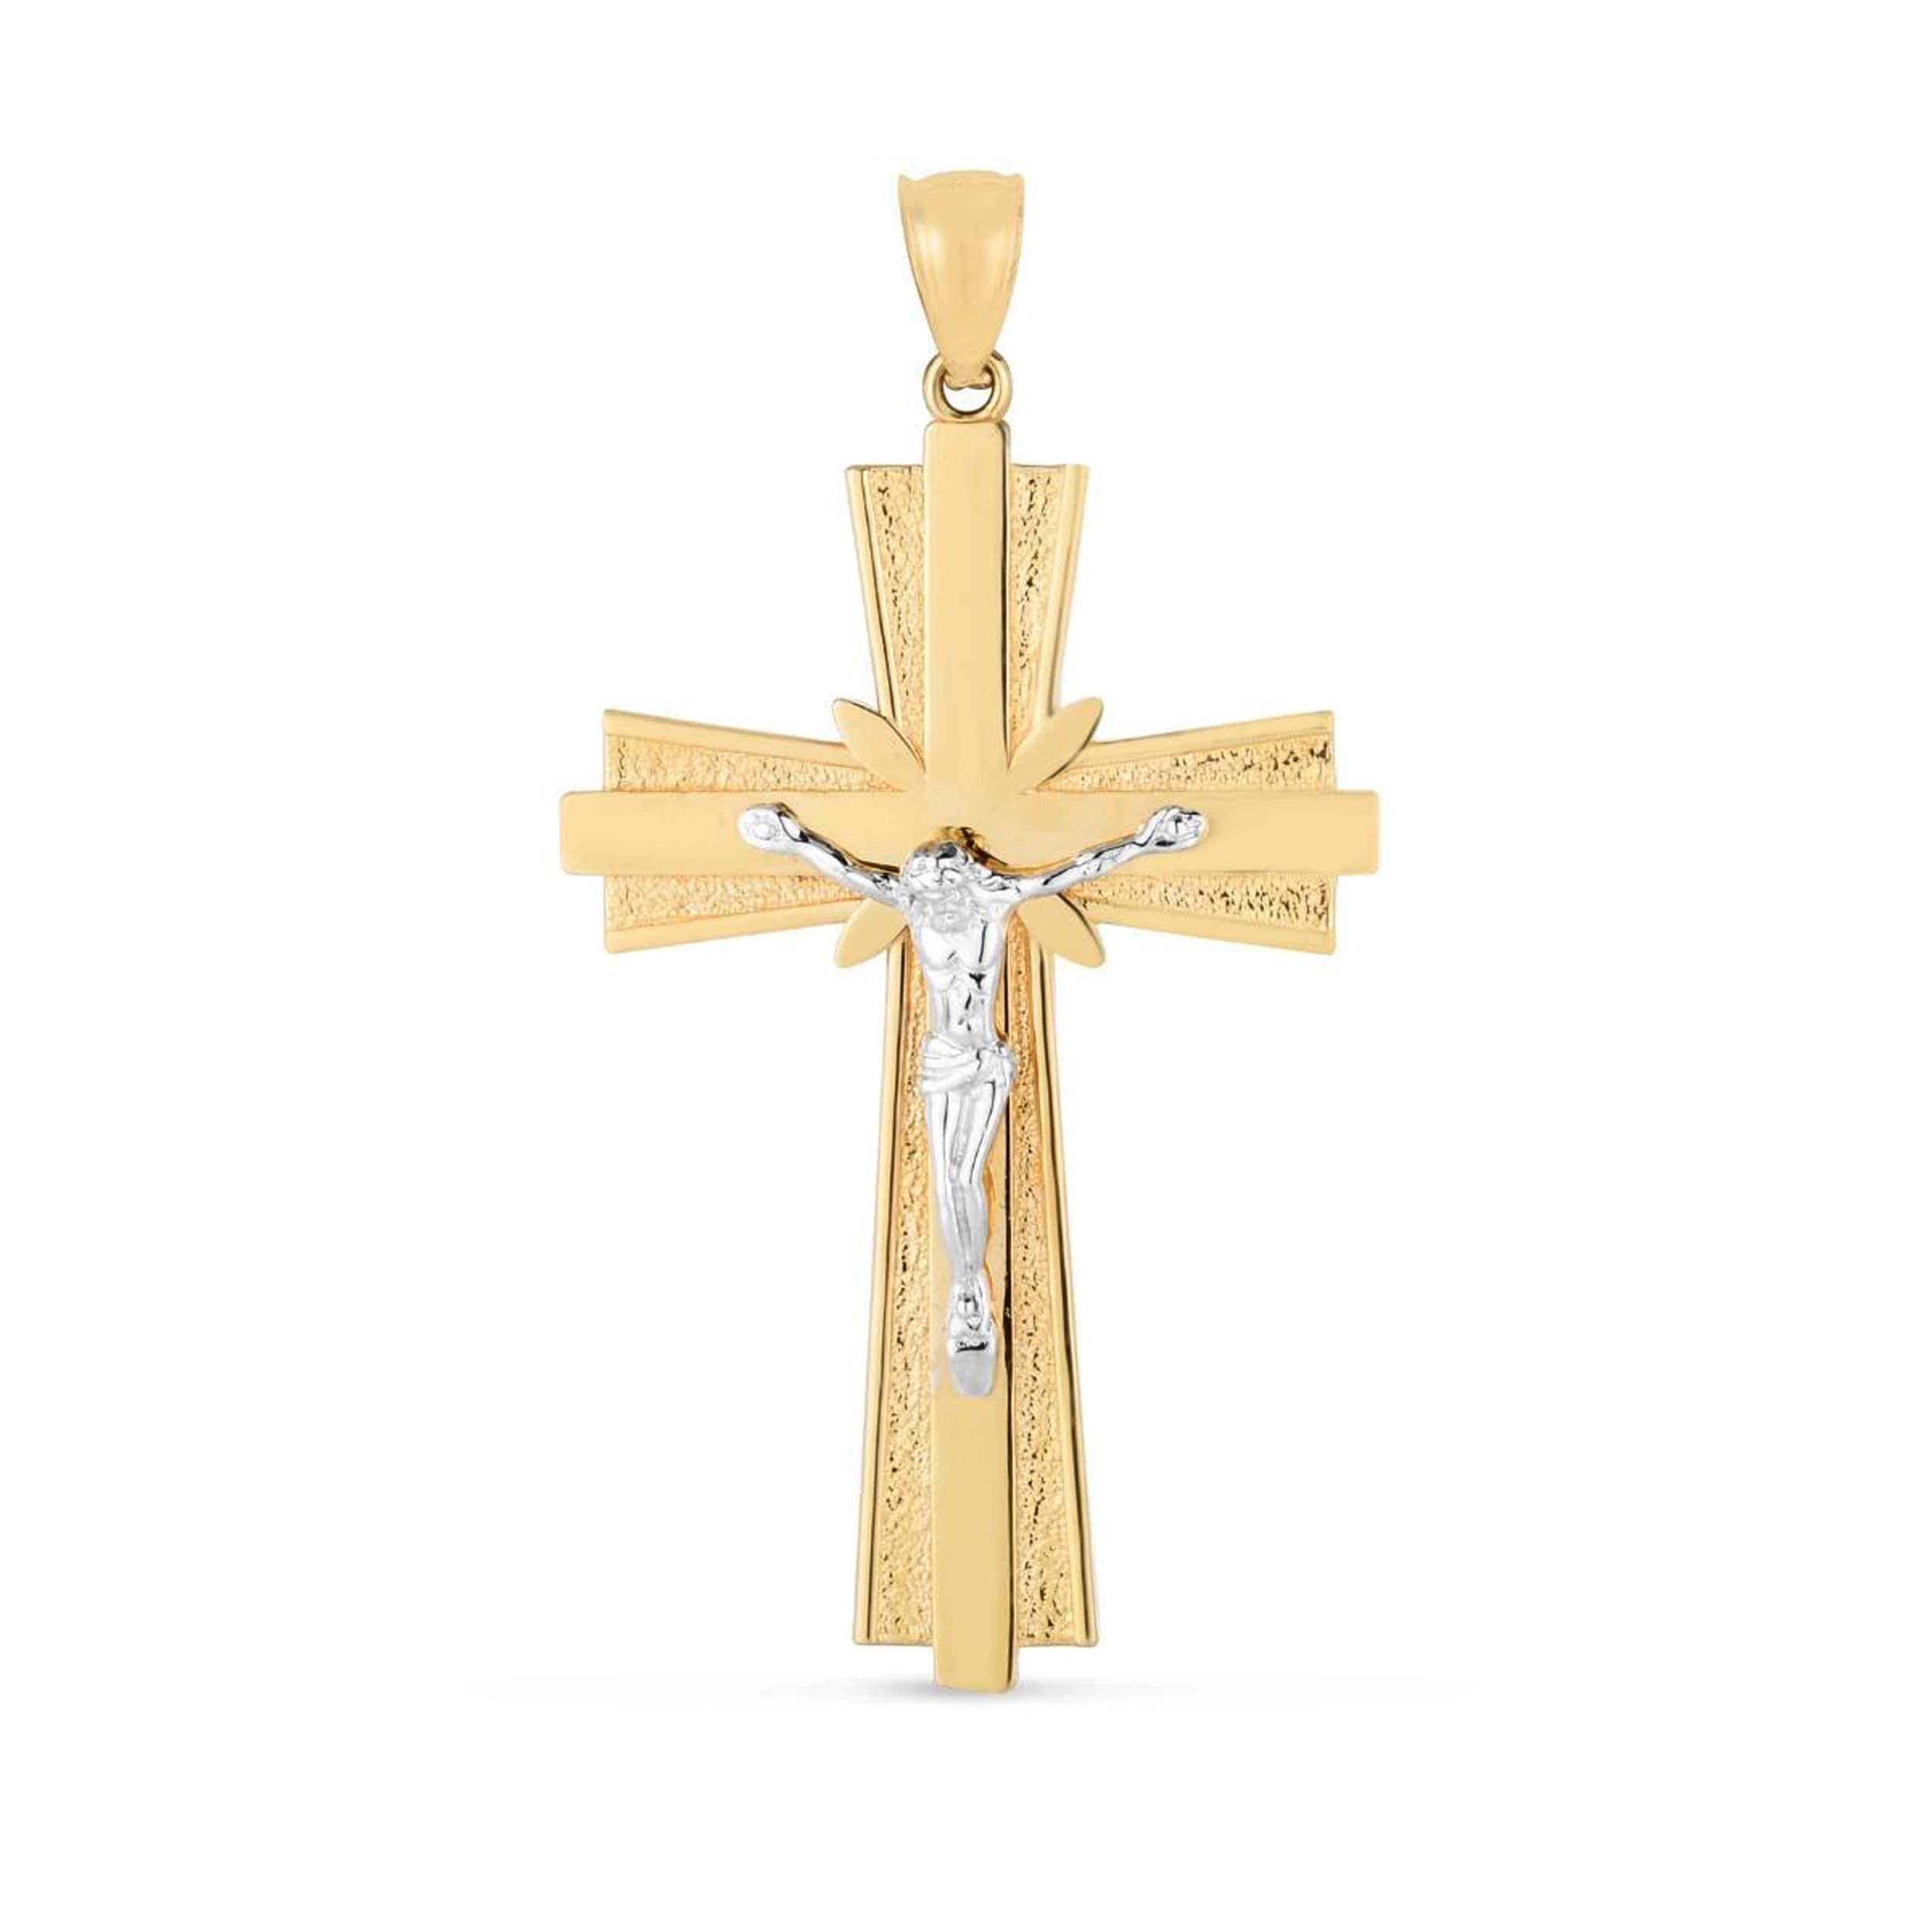 14K Yellow And White Gold Jesus Cross Charm Pendant fine designer jewelry for men and women